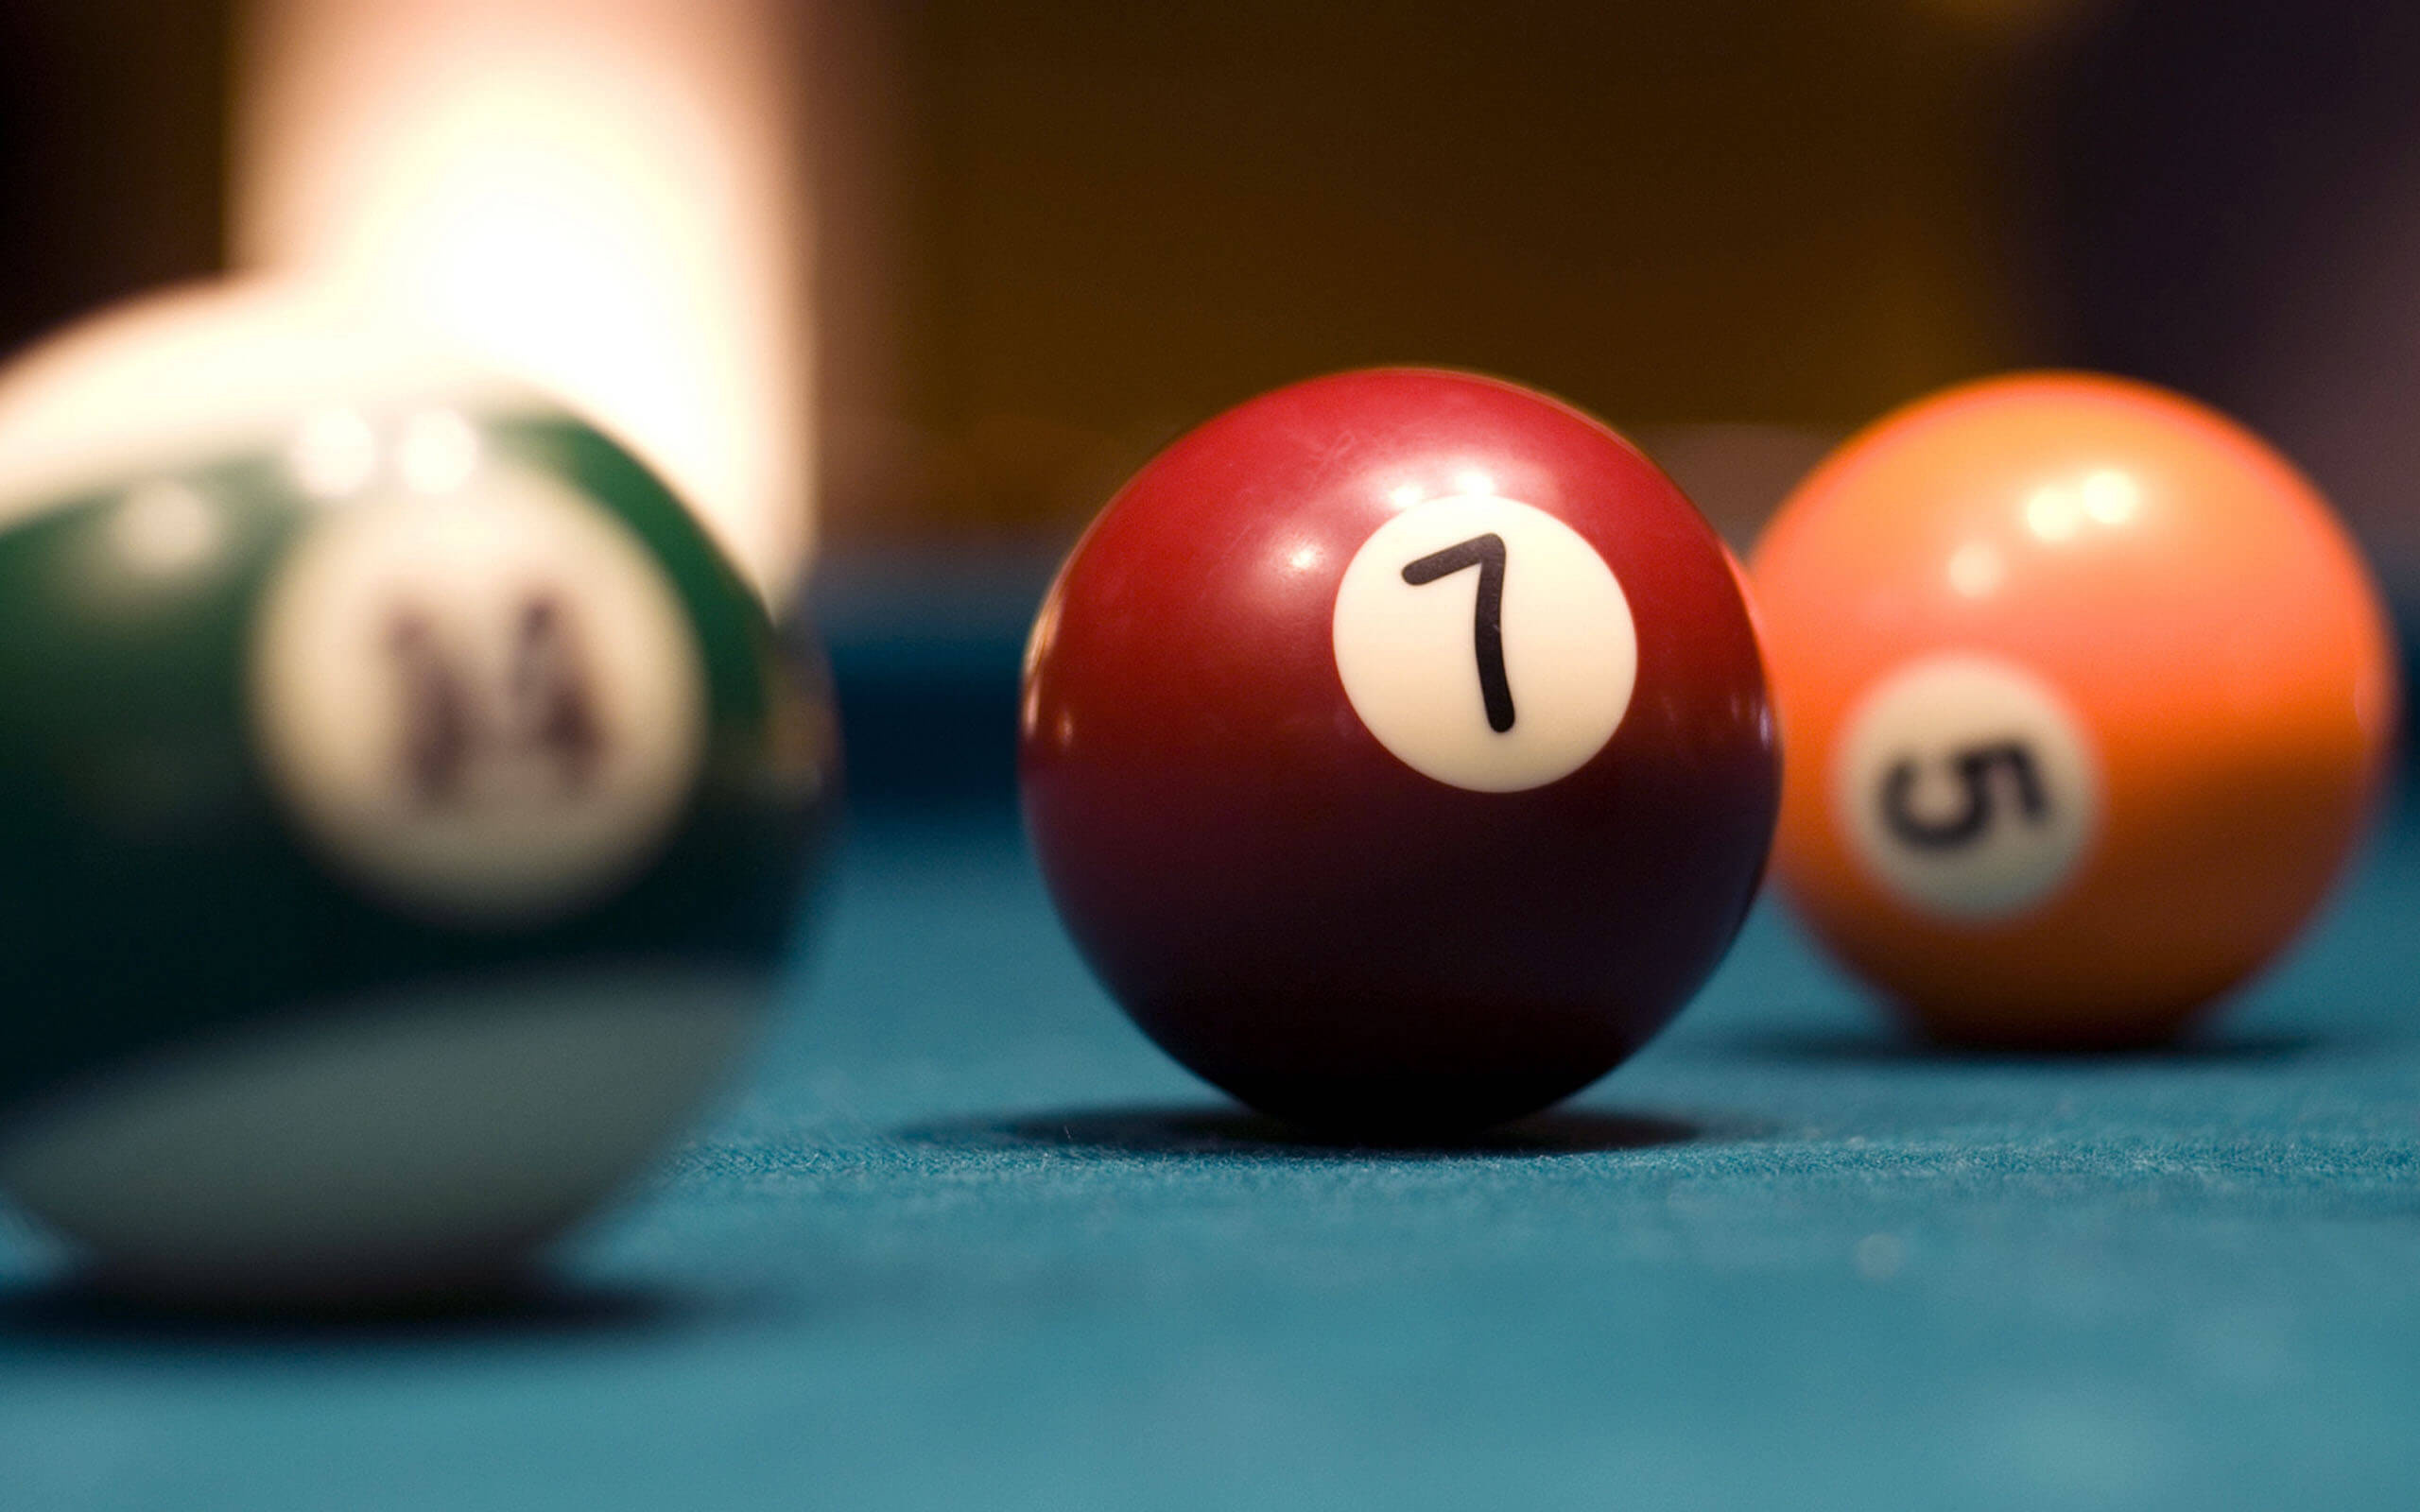 Billiards: Small but hard and numbered balls, Used in carom style, pool and snooker, Cue sports. 2560x1600 HD Wallpaper.